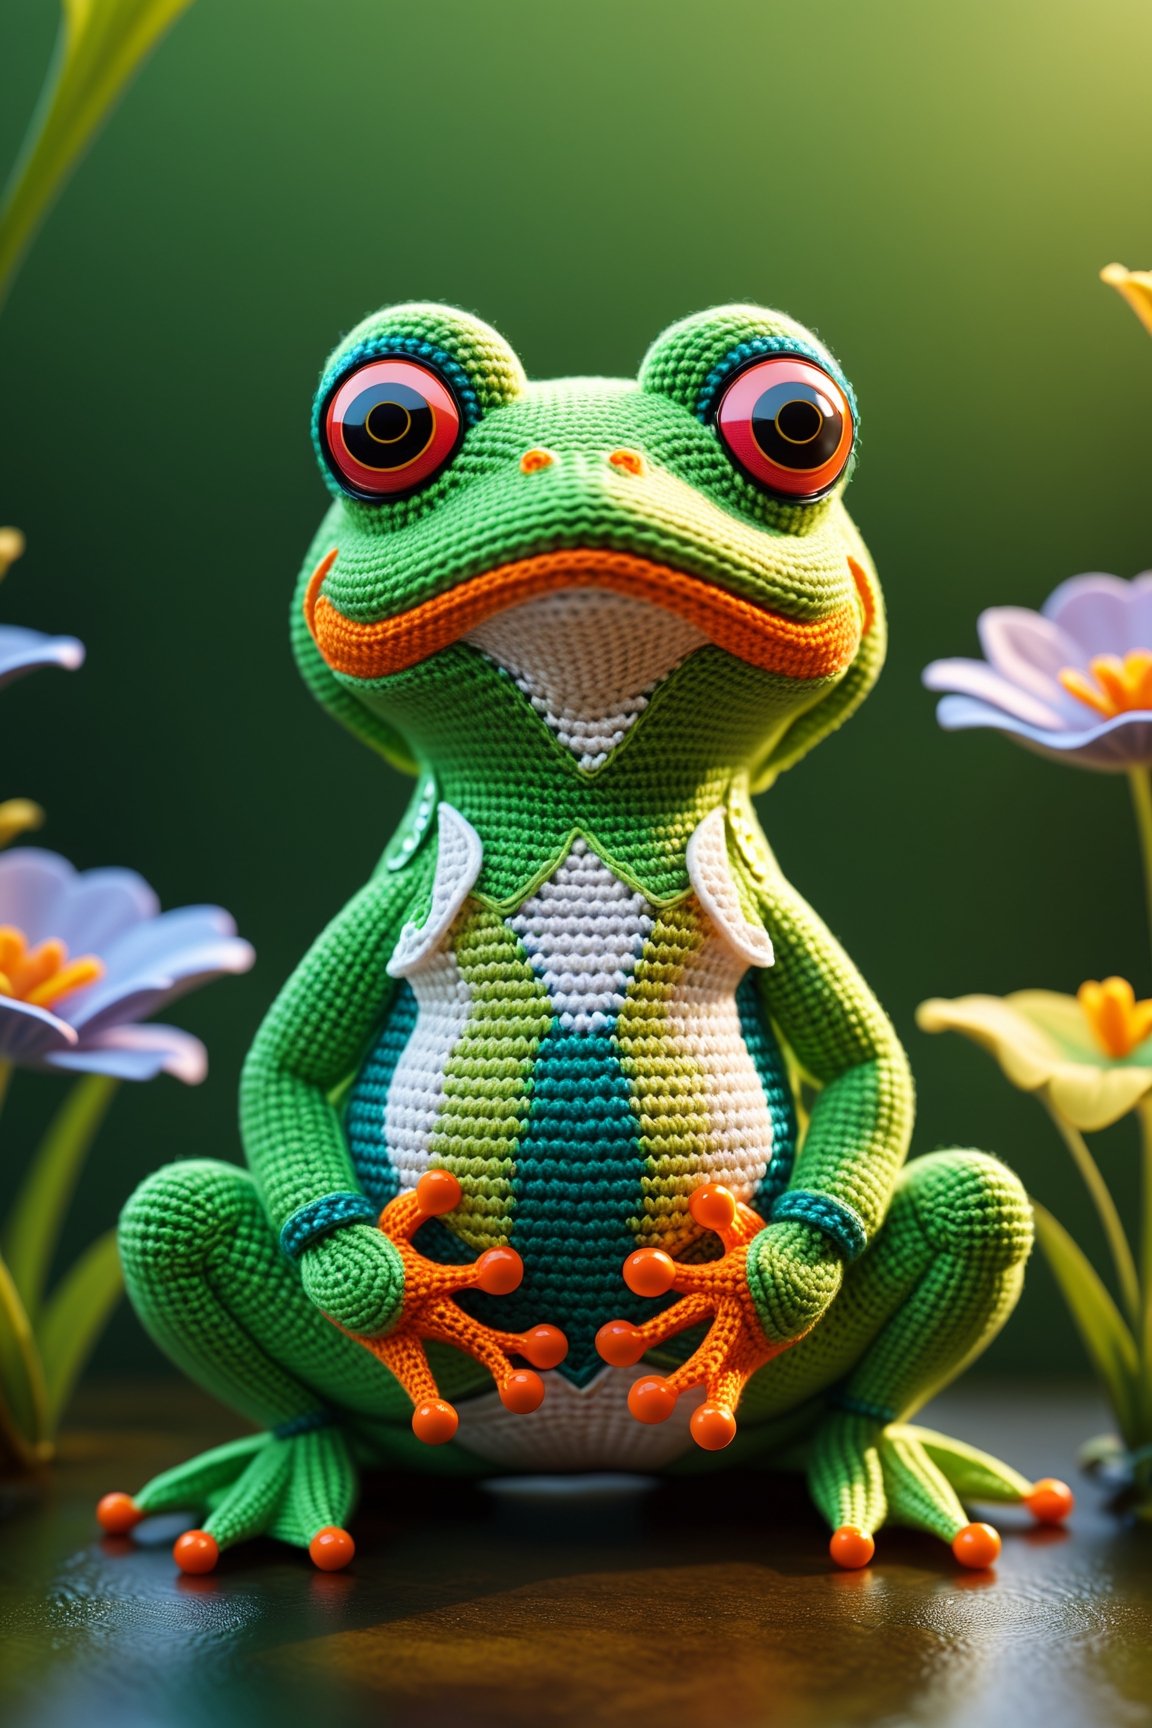 Amigurumi,frog,3Drendering,toycollection,Ultra-detailed,softtextures,brightcolors,cute,whimsical,handmade,+HD,studio lighting,wonderland,vibrant,playful